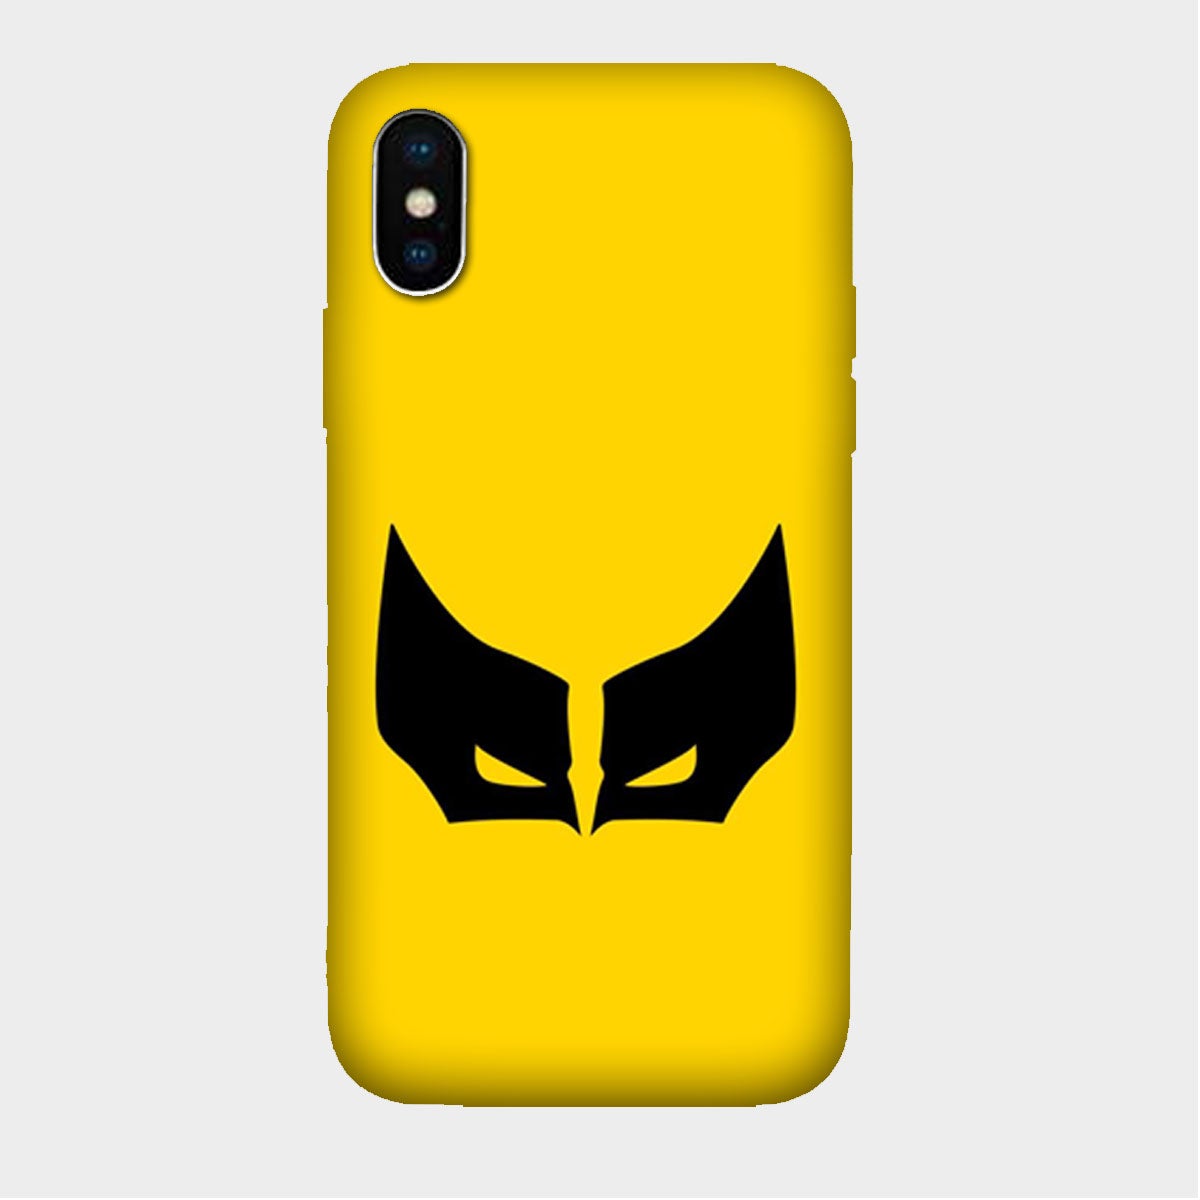 Wolverine - Yellow - Mobile Phone Cover - Hard Case